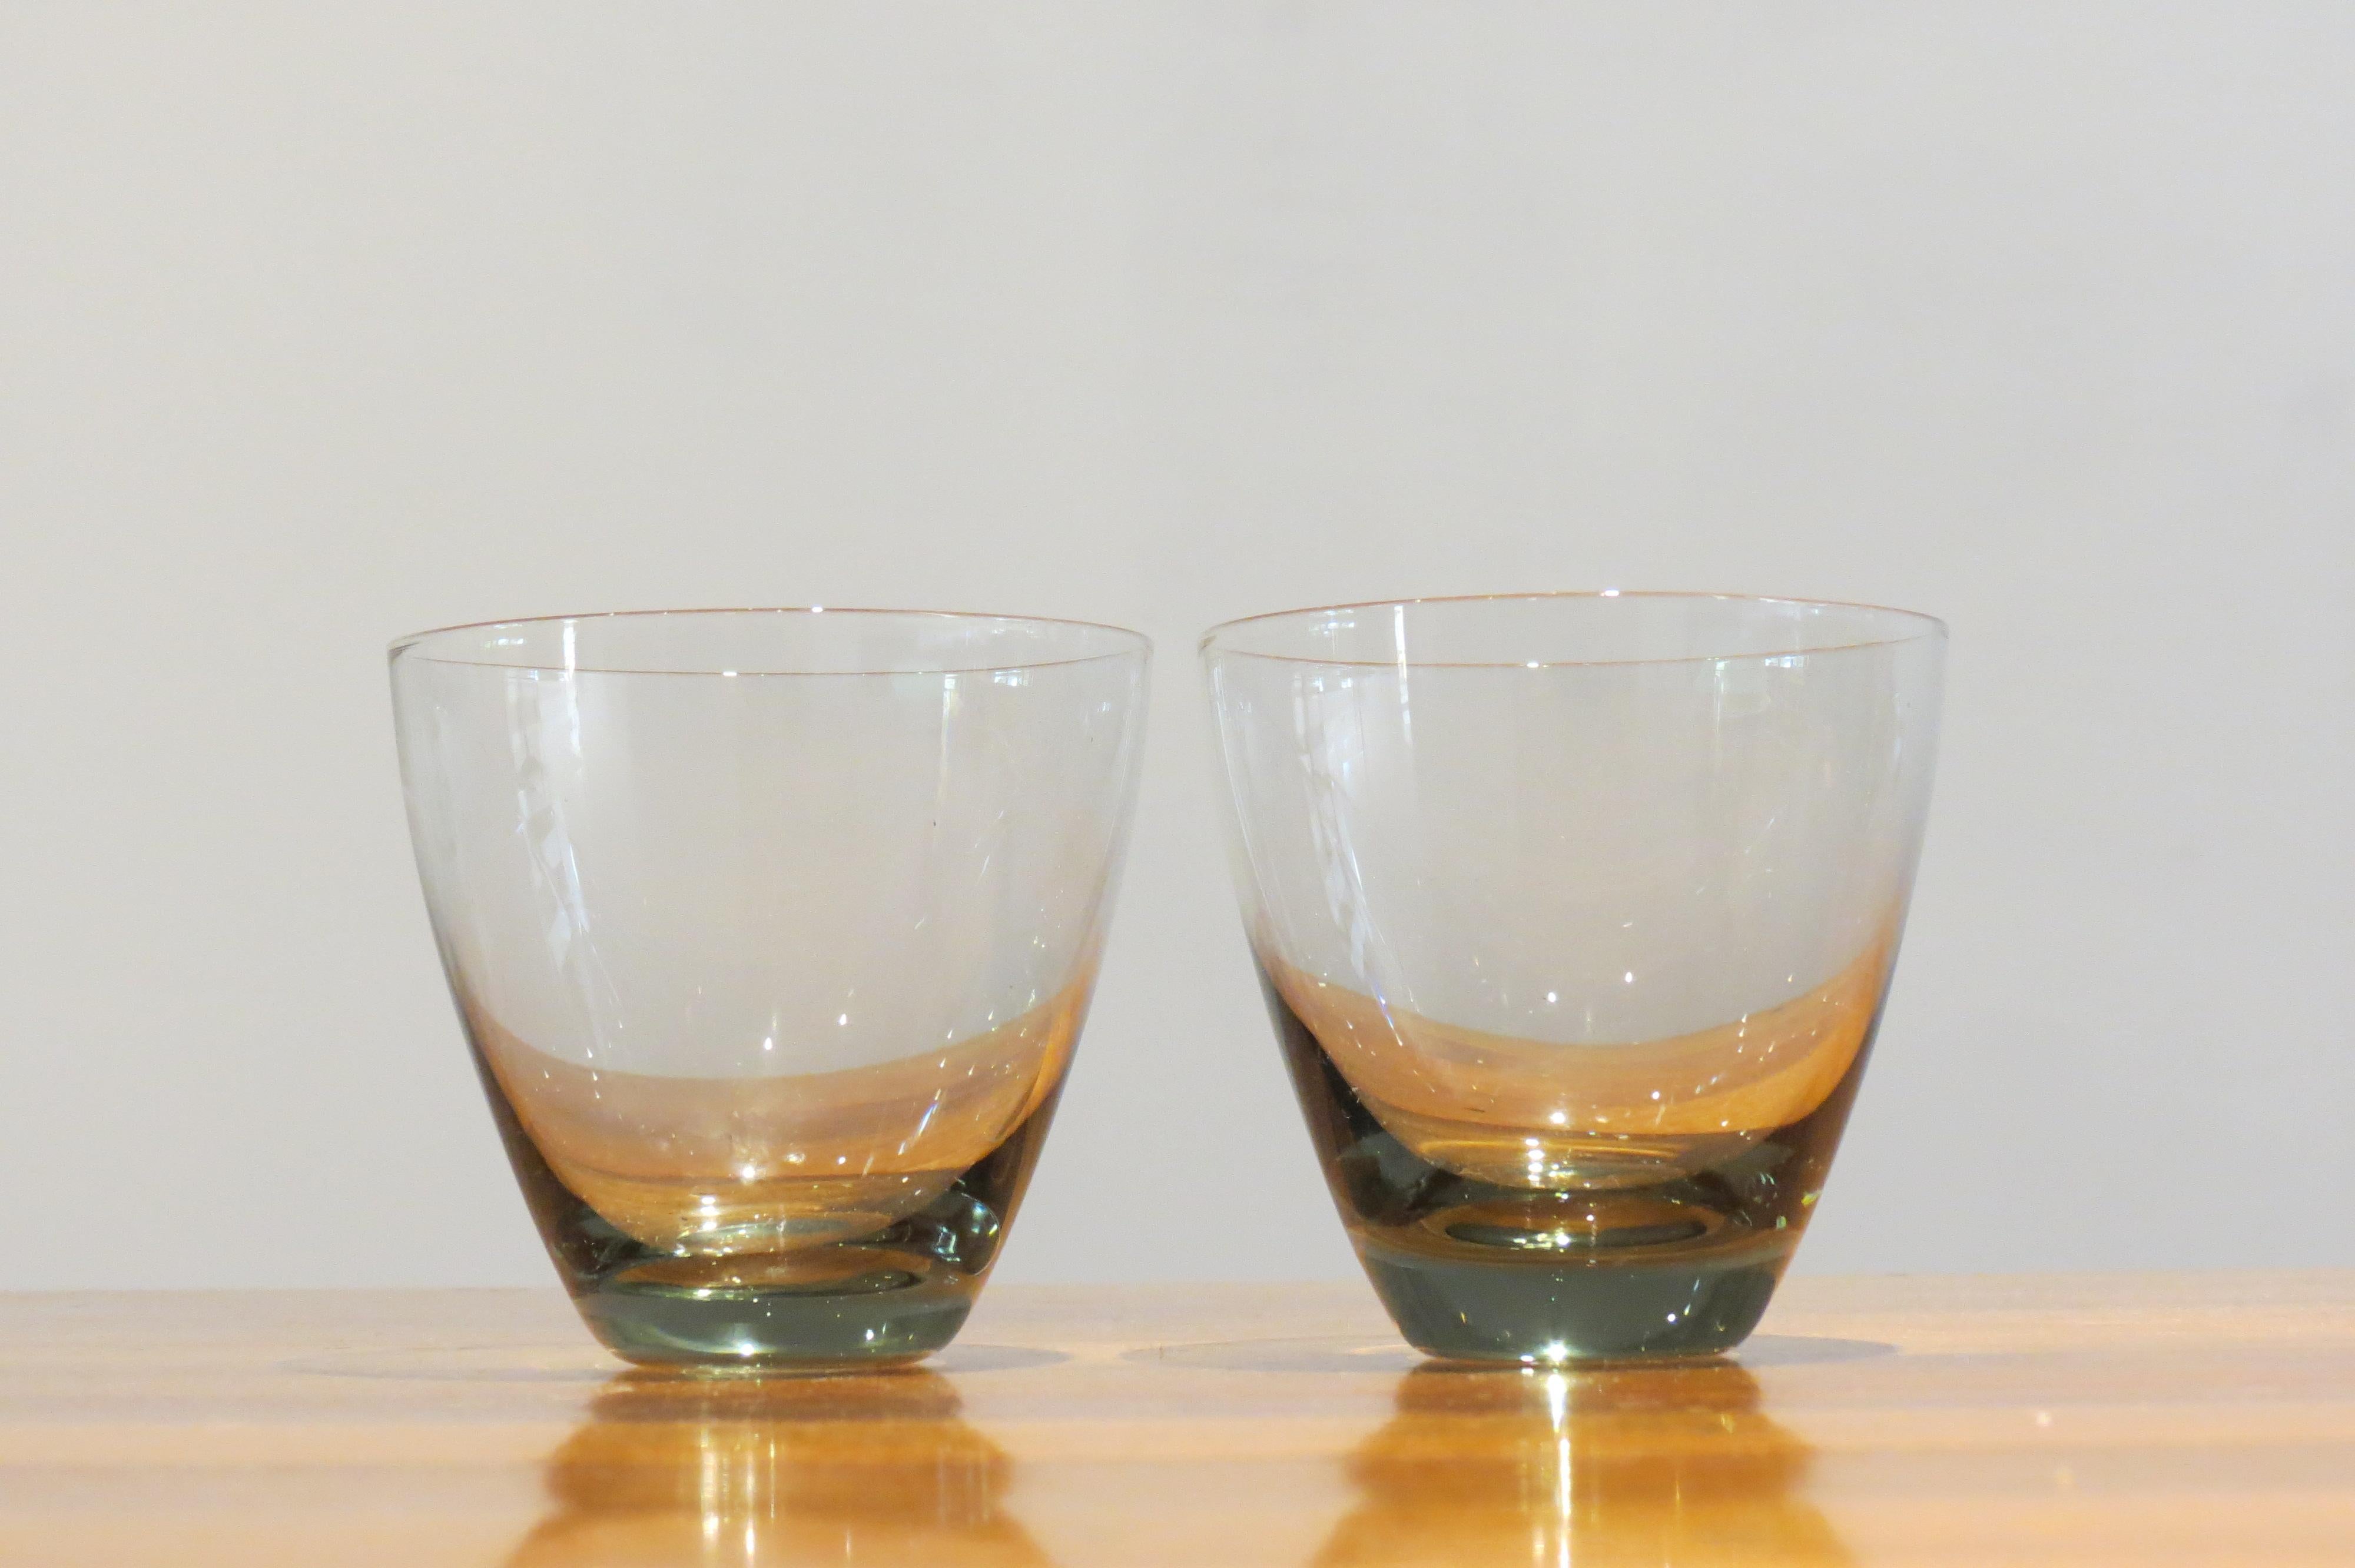 A set of two vintage Holmegaard, Denmark glasses.
Designed by Per Lutken, 1950s.
Smoked glass
Good condition
Measures: 7.5cm tall, 8cm diameter widest point
St931.
 